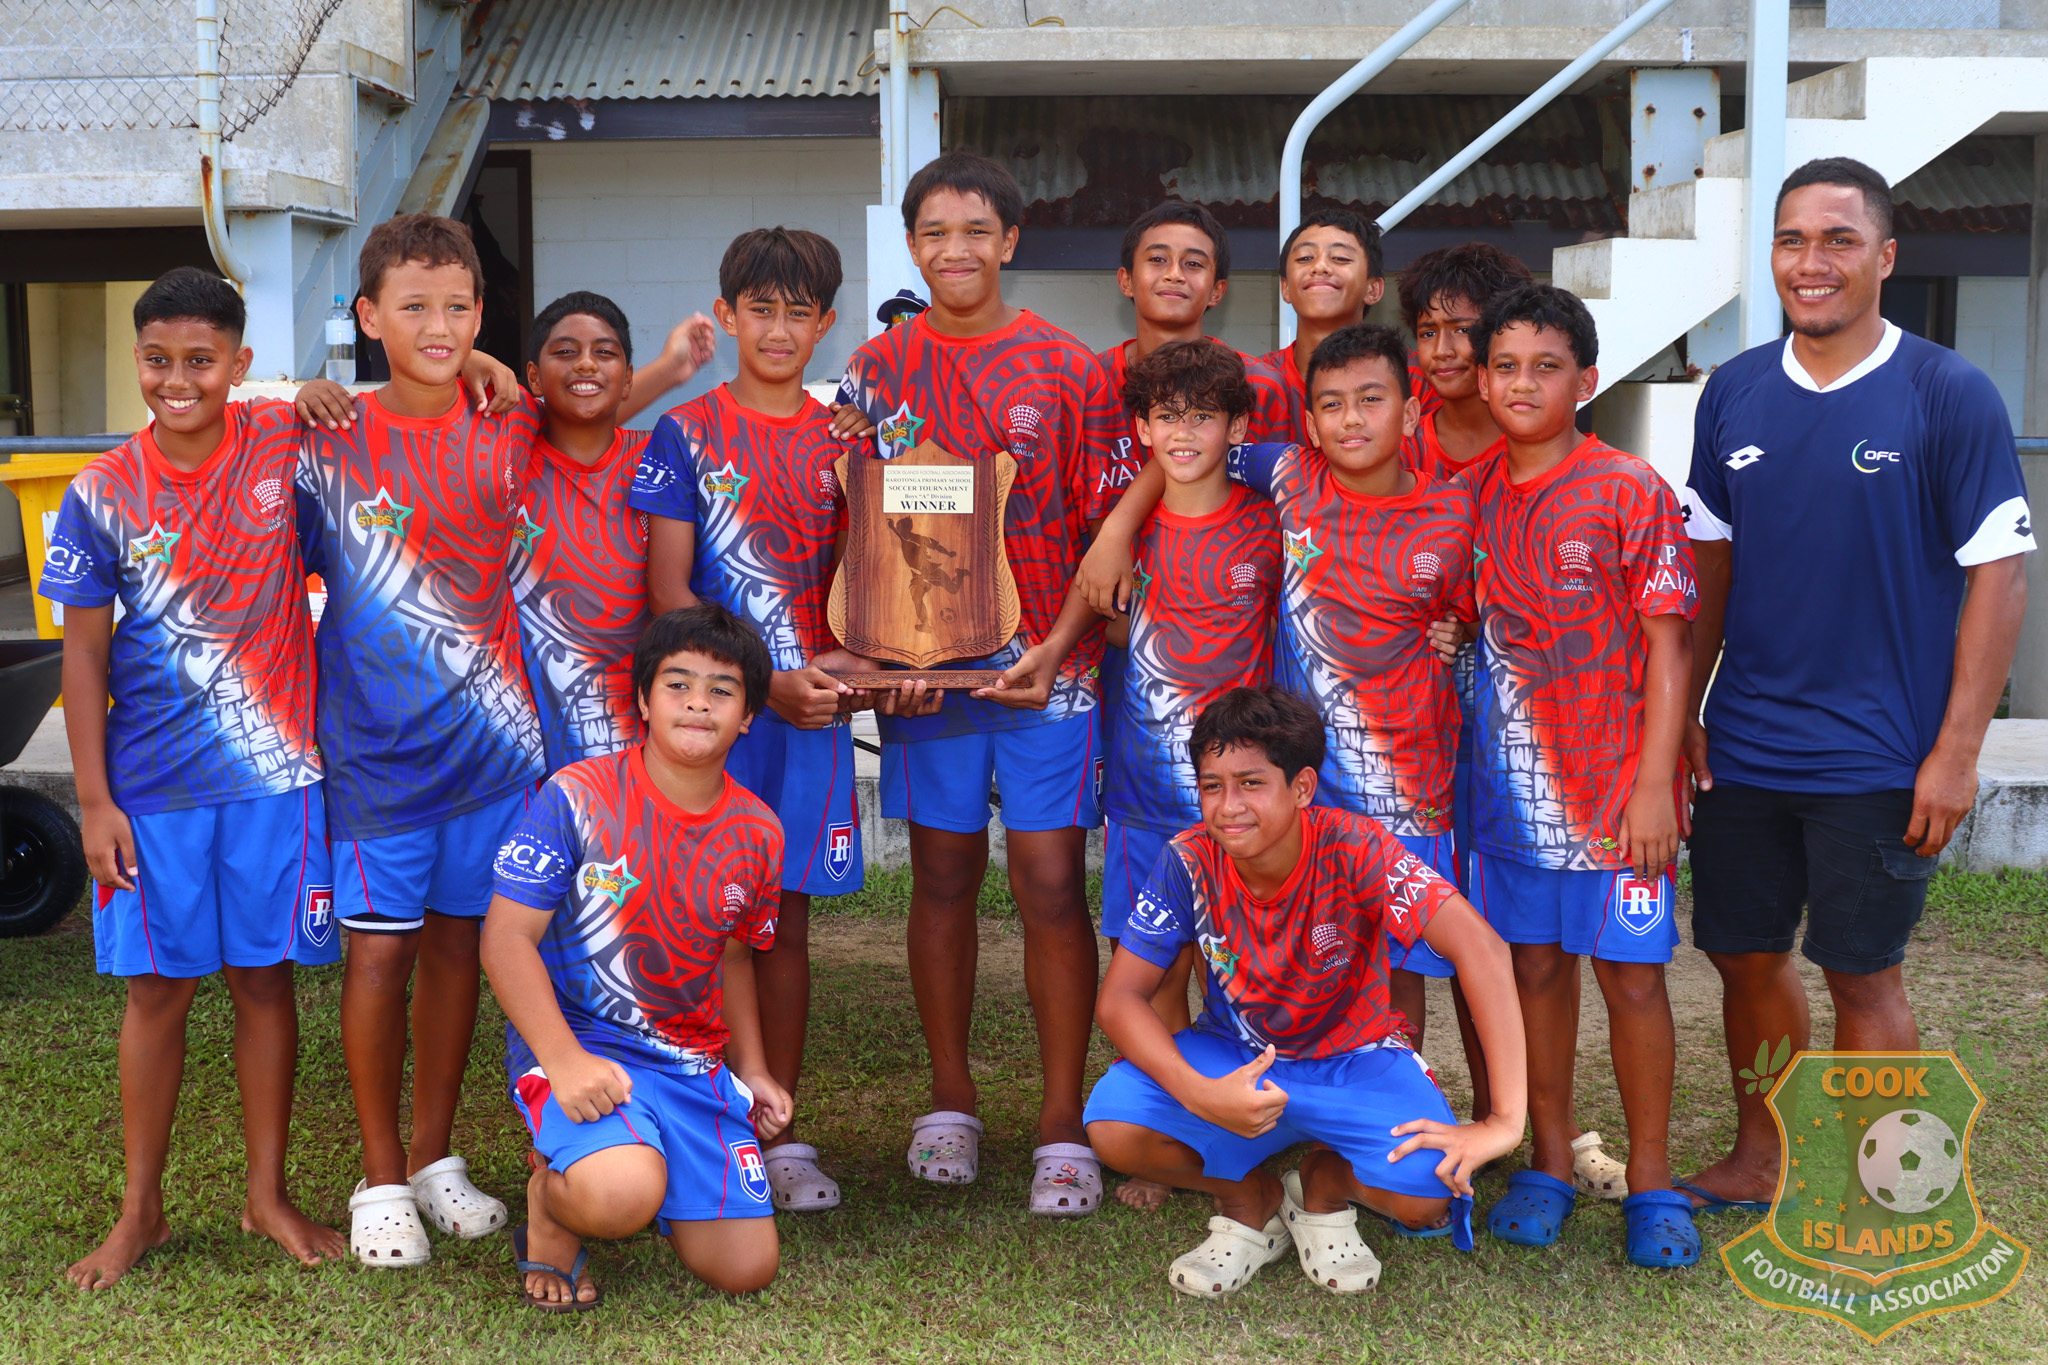 Apii Avarua and Nukutere College crowned champions in CIFA Schools Competition